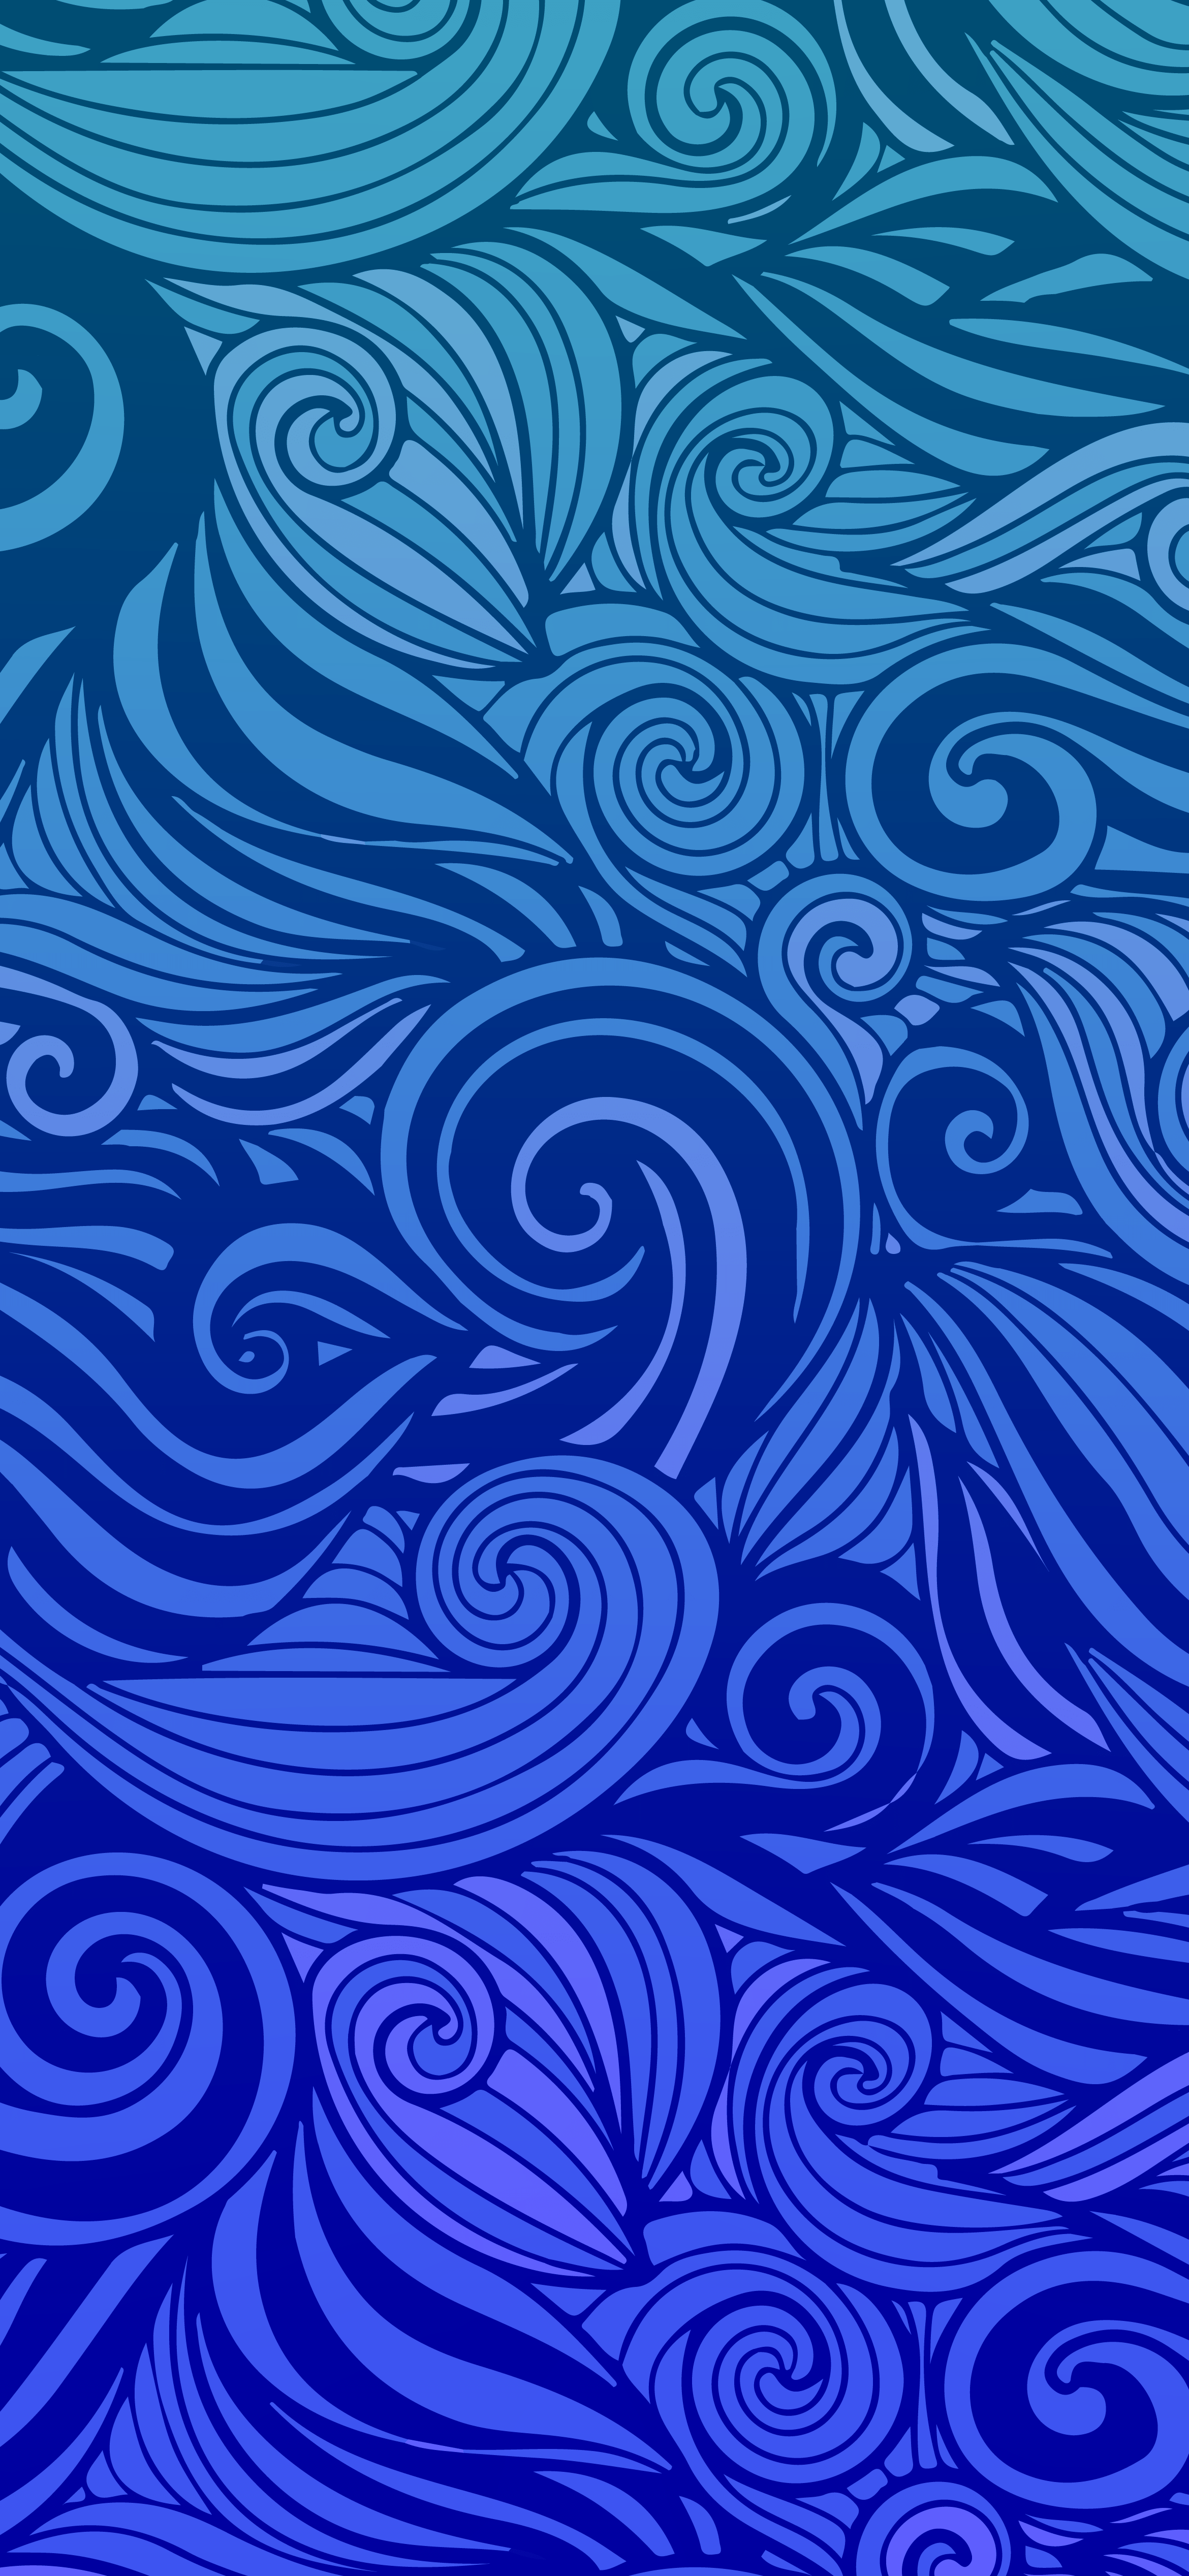 Blue aesthetic pattern wallpaper for phone. Free download 4K